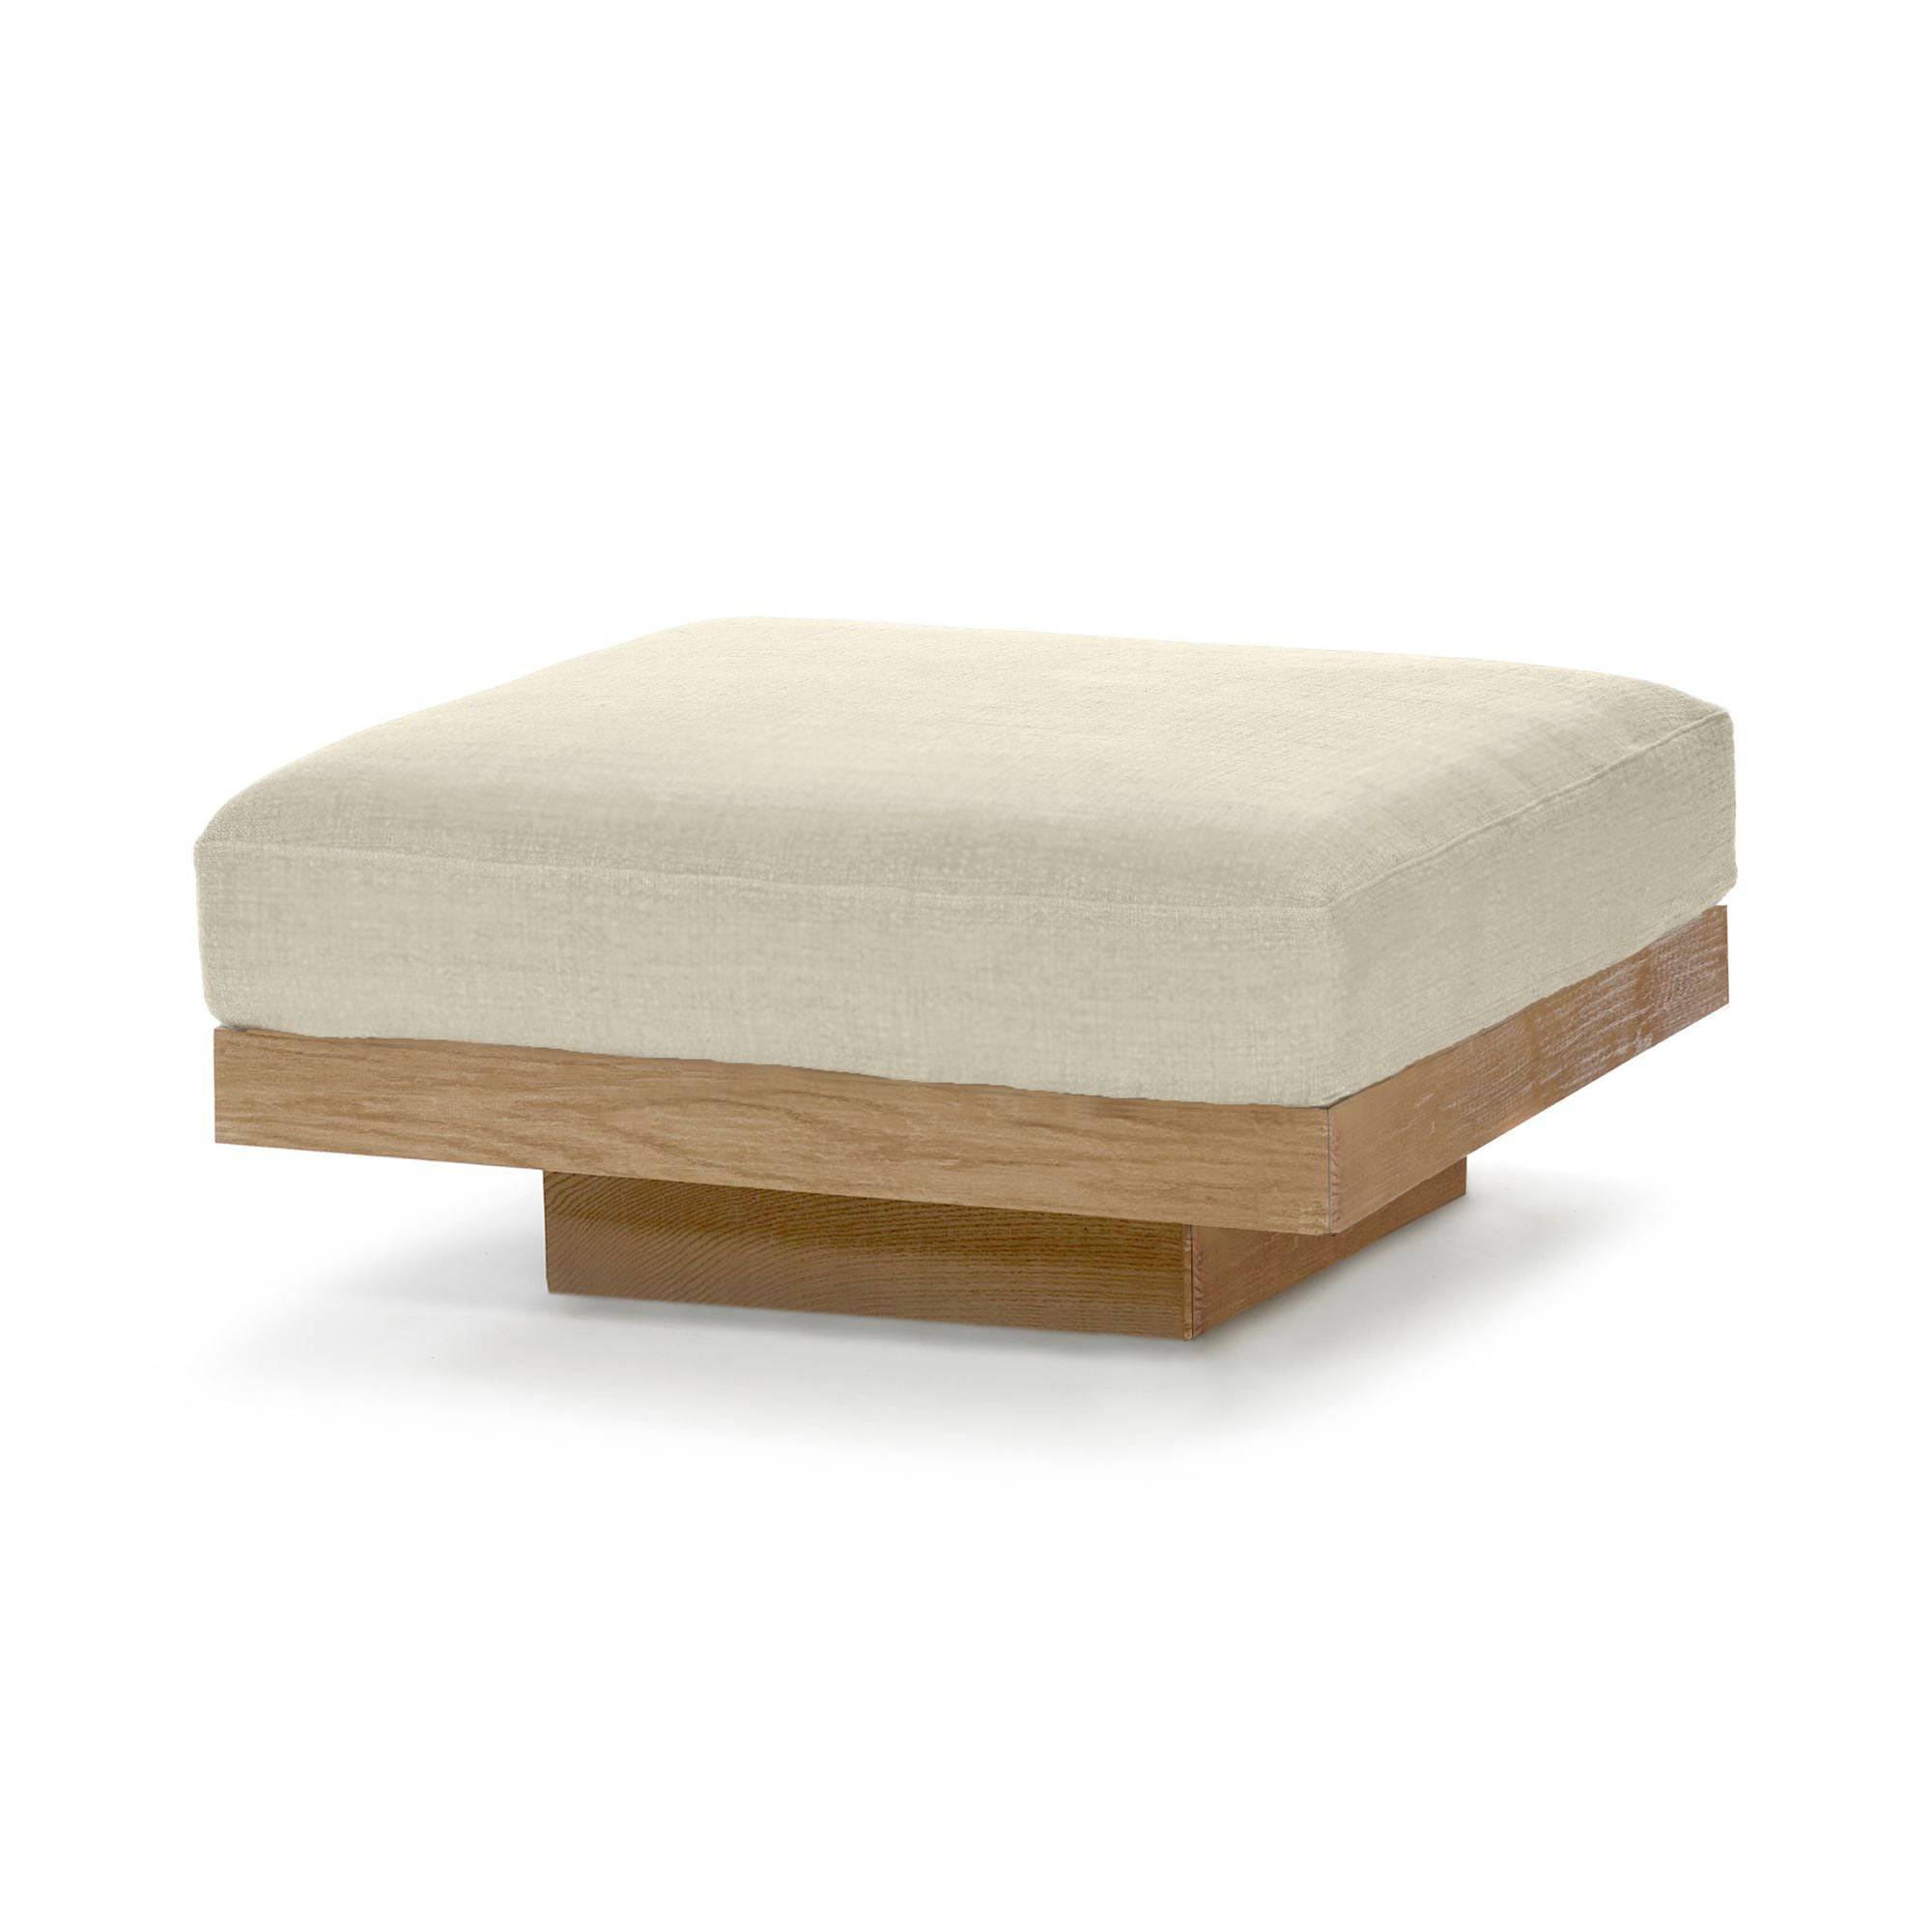 Outdoor Rudolph Footstool - THAT COOL LIVING